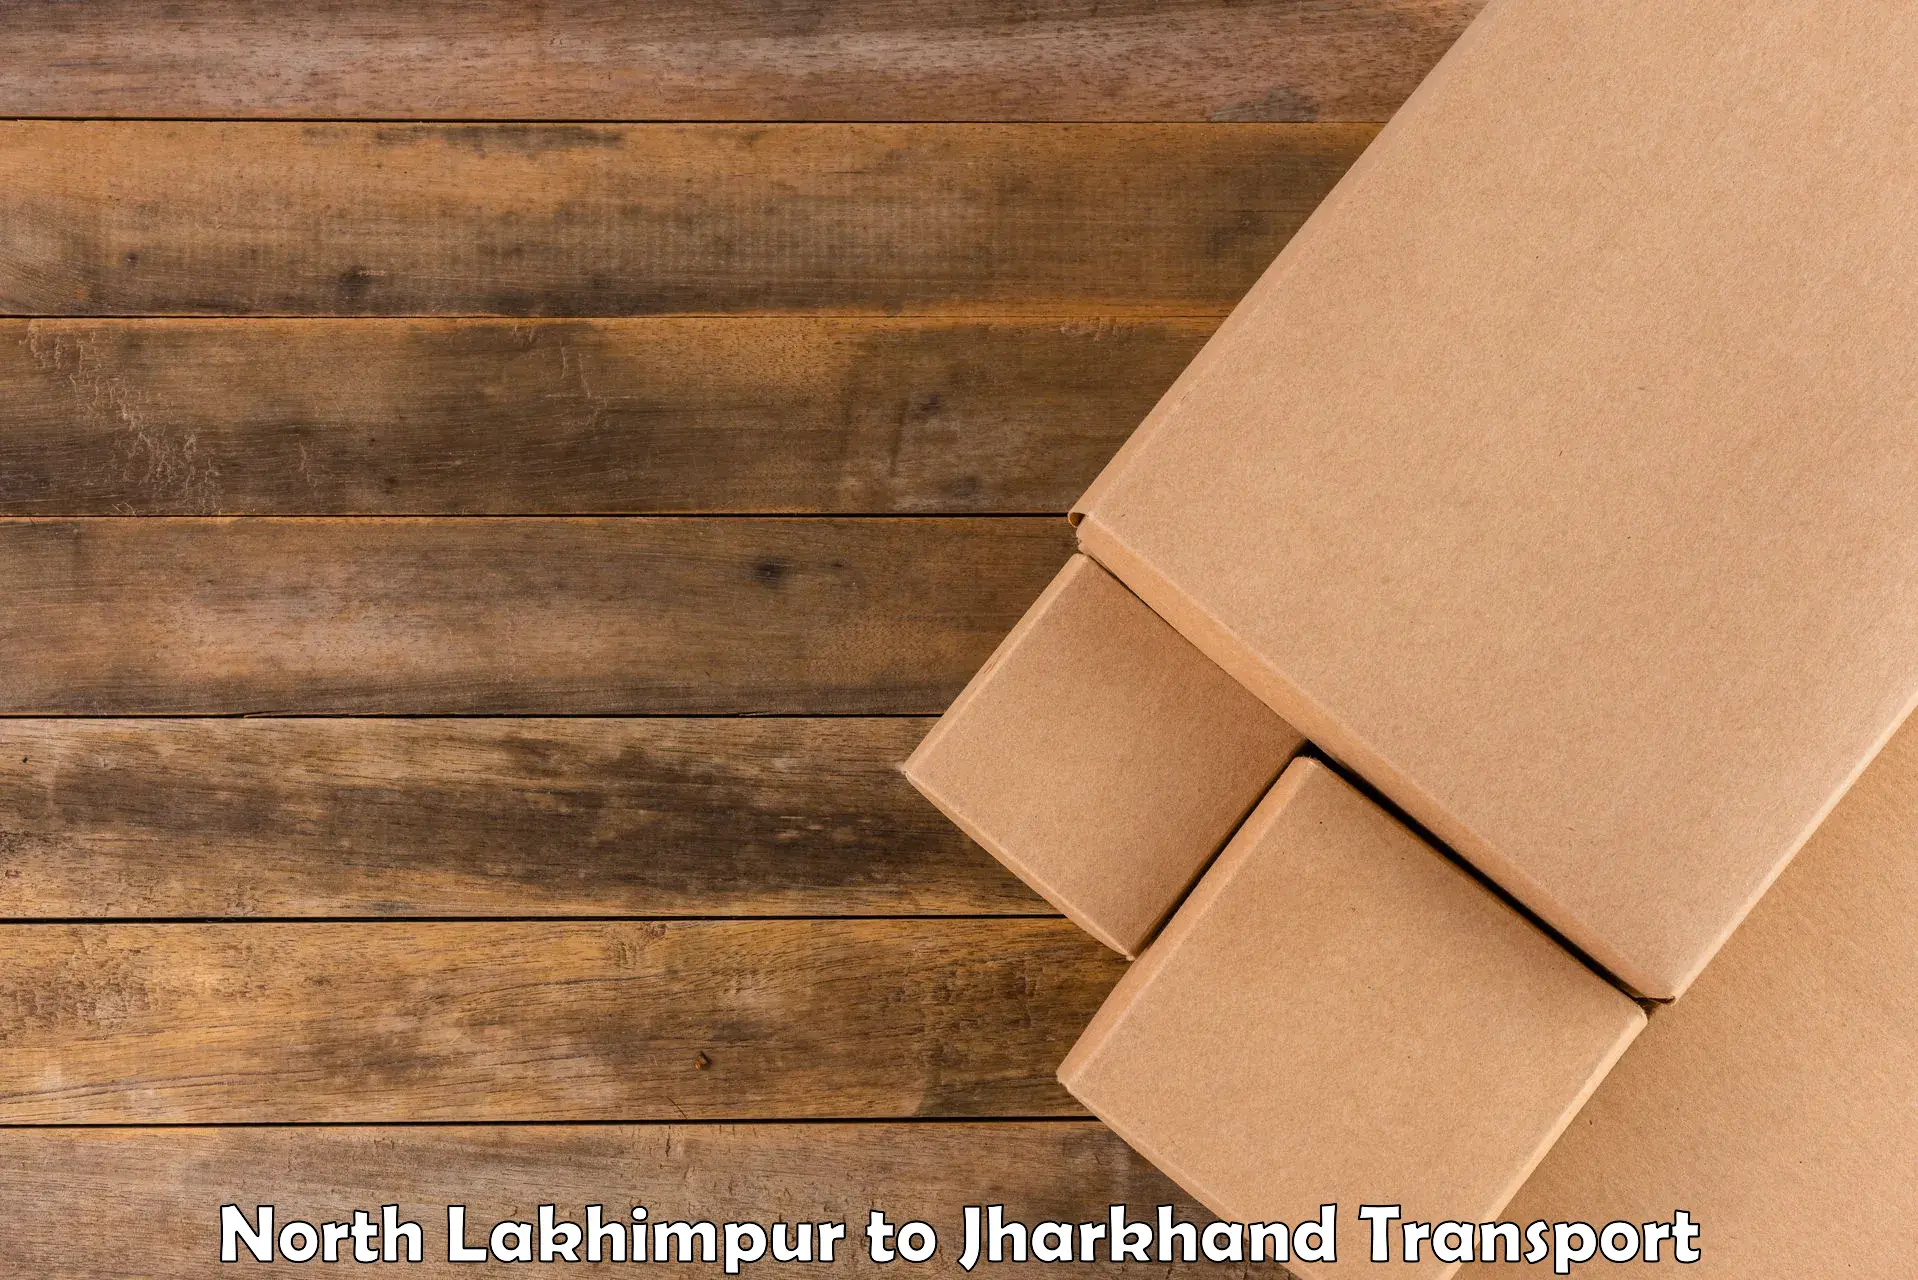 Truck transport companies in India North Lakhimpur to Domchanch